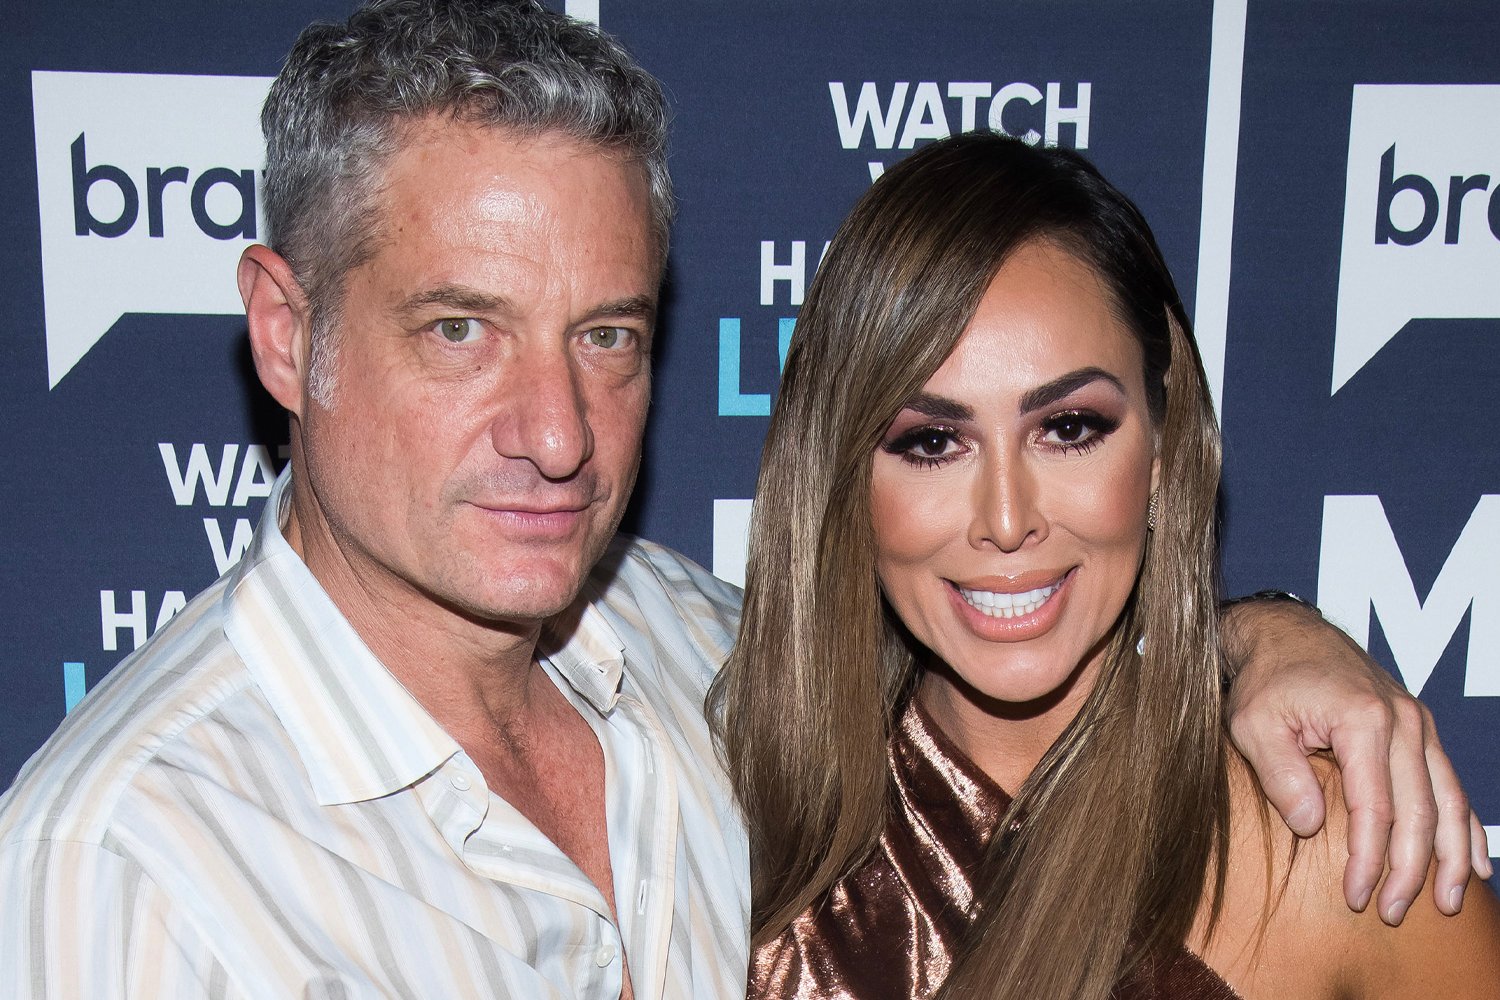 Rick Leventhal out at Fox News, Same Week Kelly Dodd Was Axed From ‘RHOC’